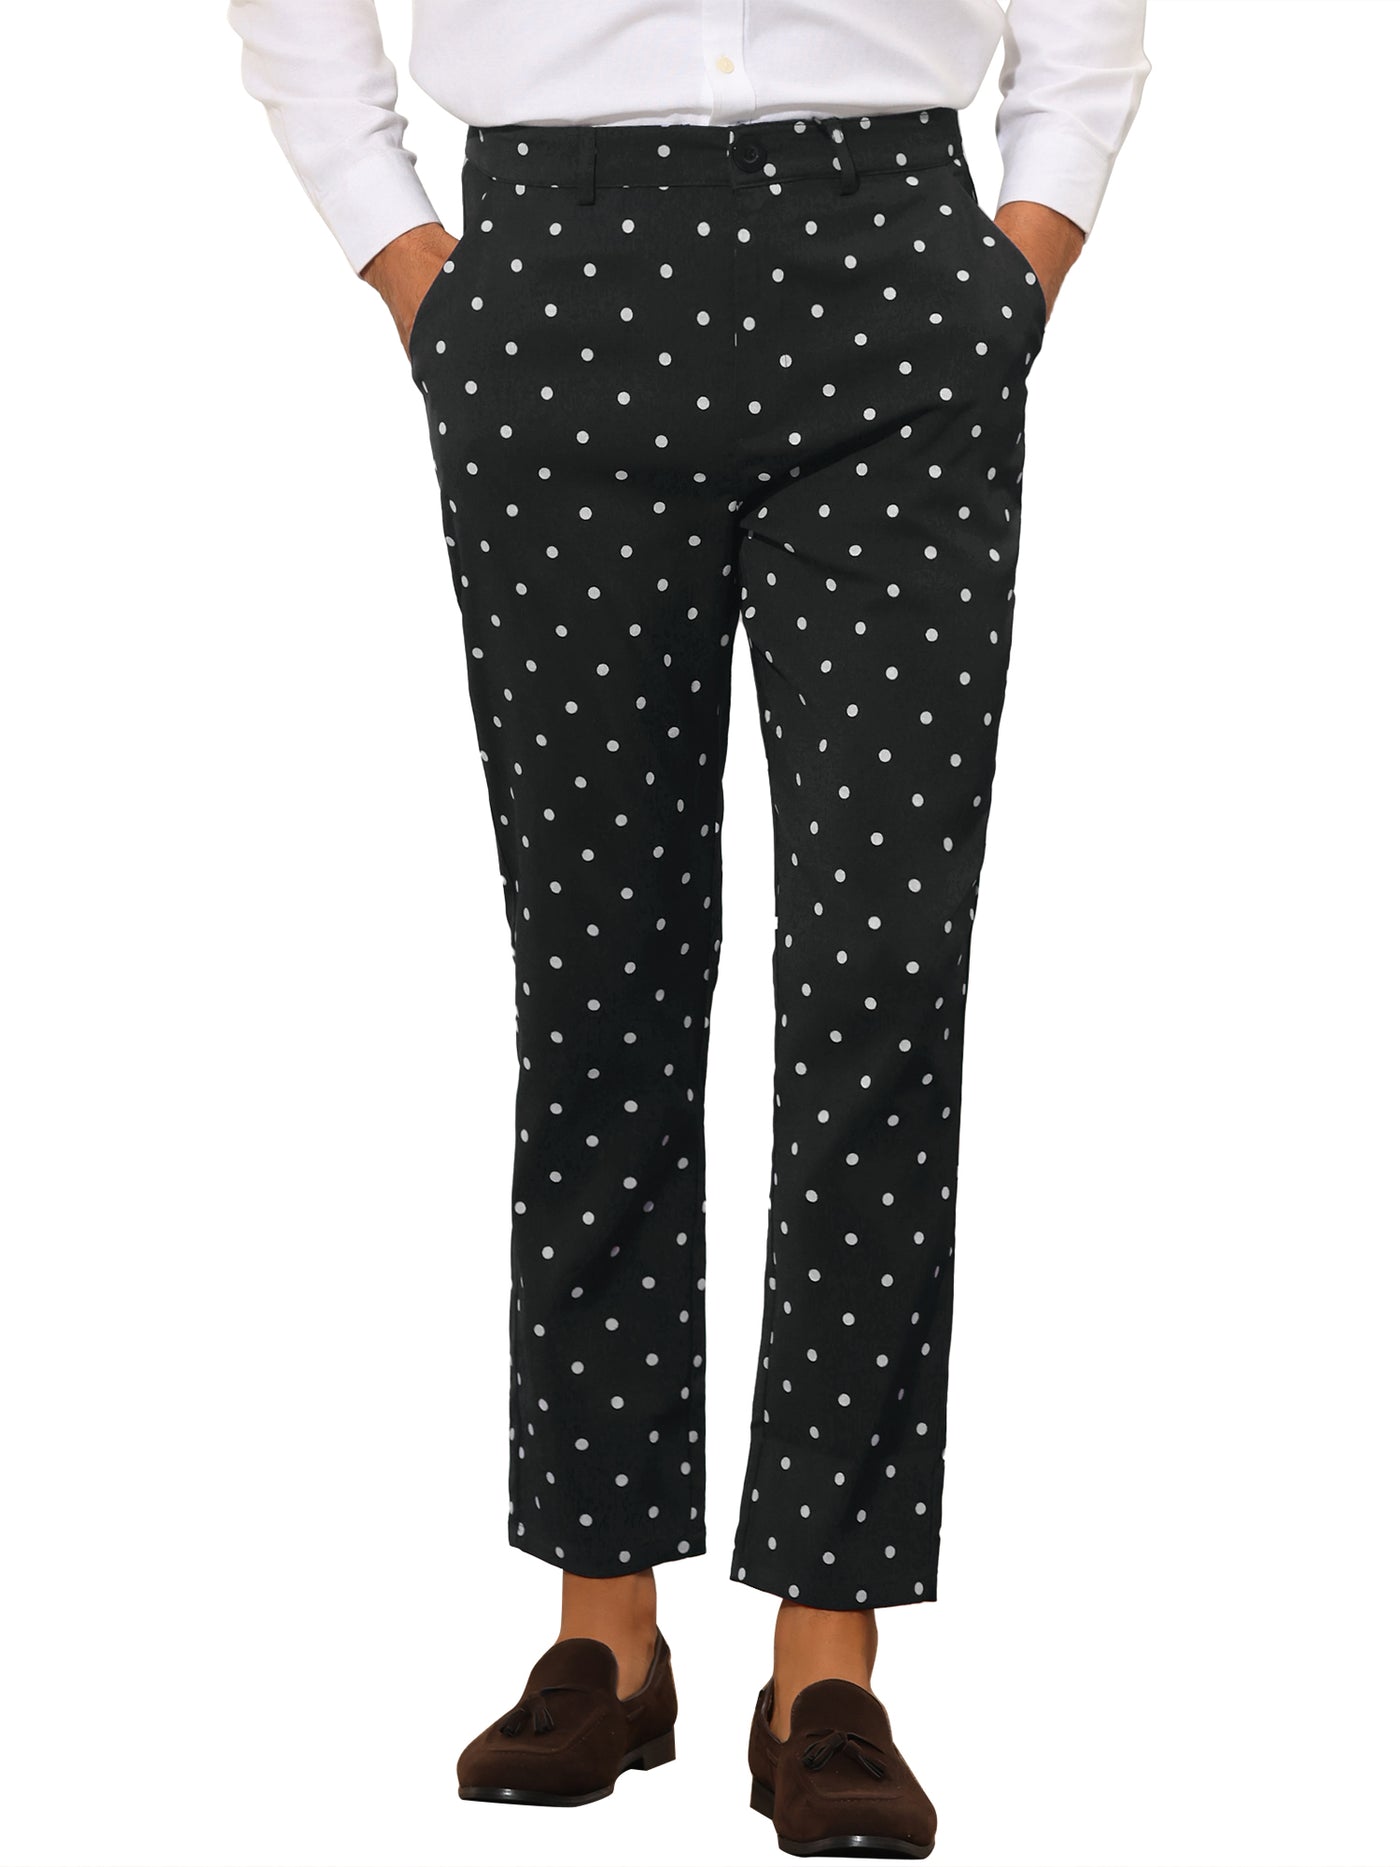 Bublédon Polka Dots Dress Pants for Men's Flat Front Slim Fit Business Printed Tapered Trousers